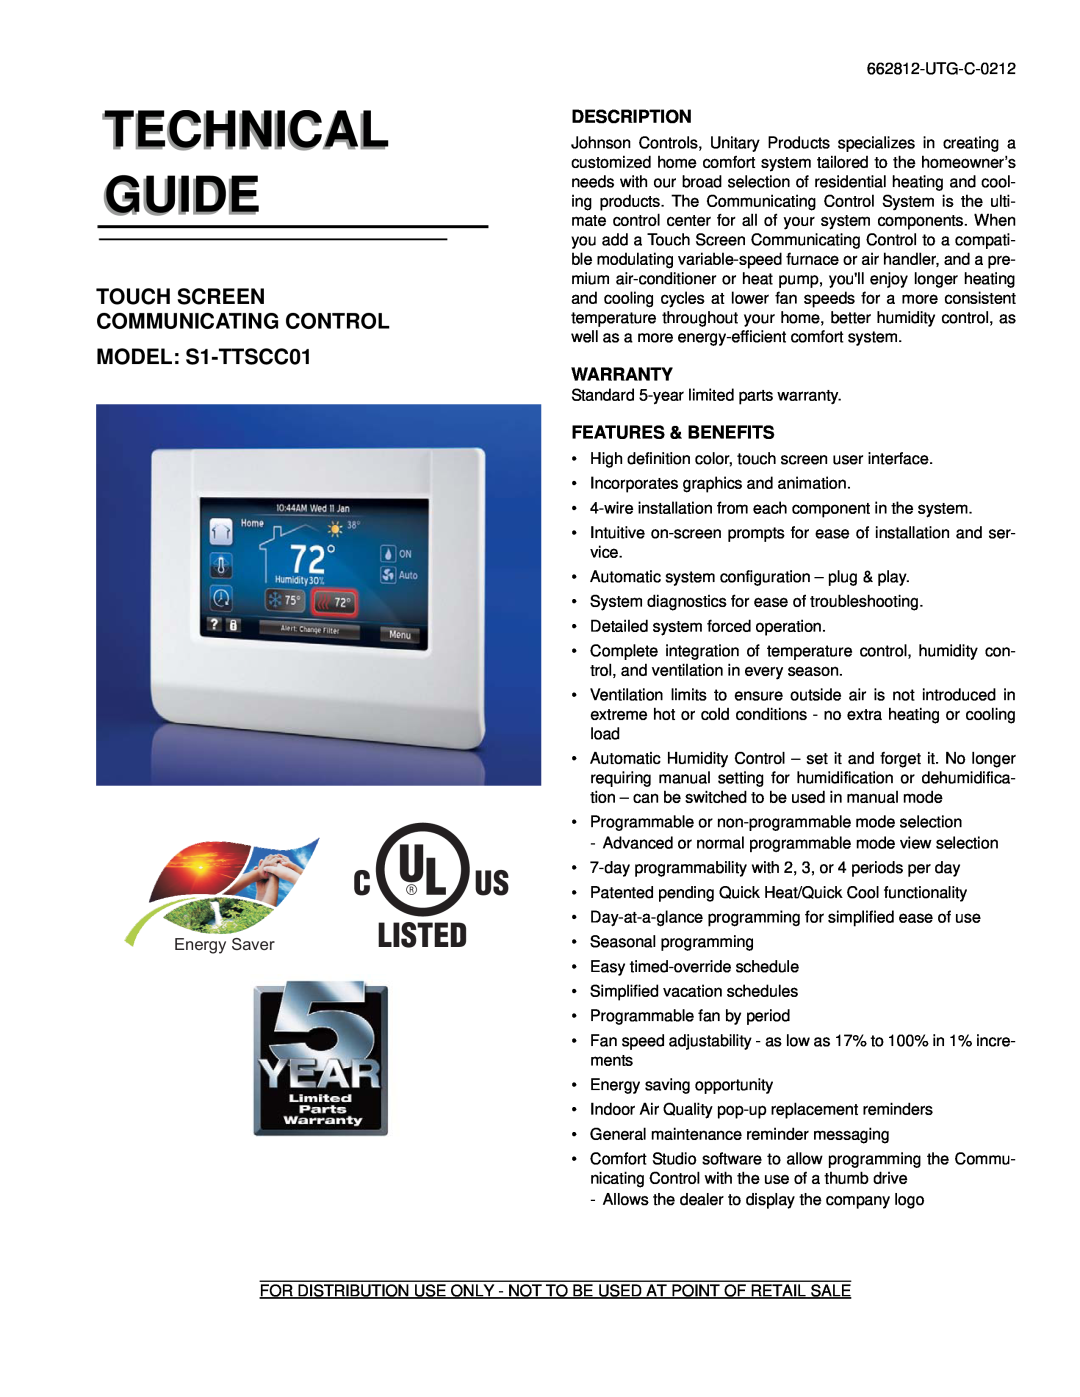 Johnson Controls S1-TTSCC01 user manual Power-Upsequence, Non-Adjustablesettings/Functionality, Available Settings 